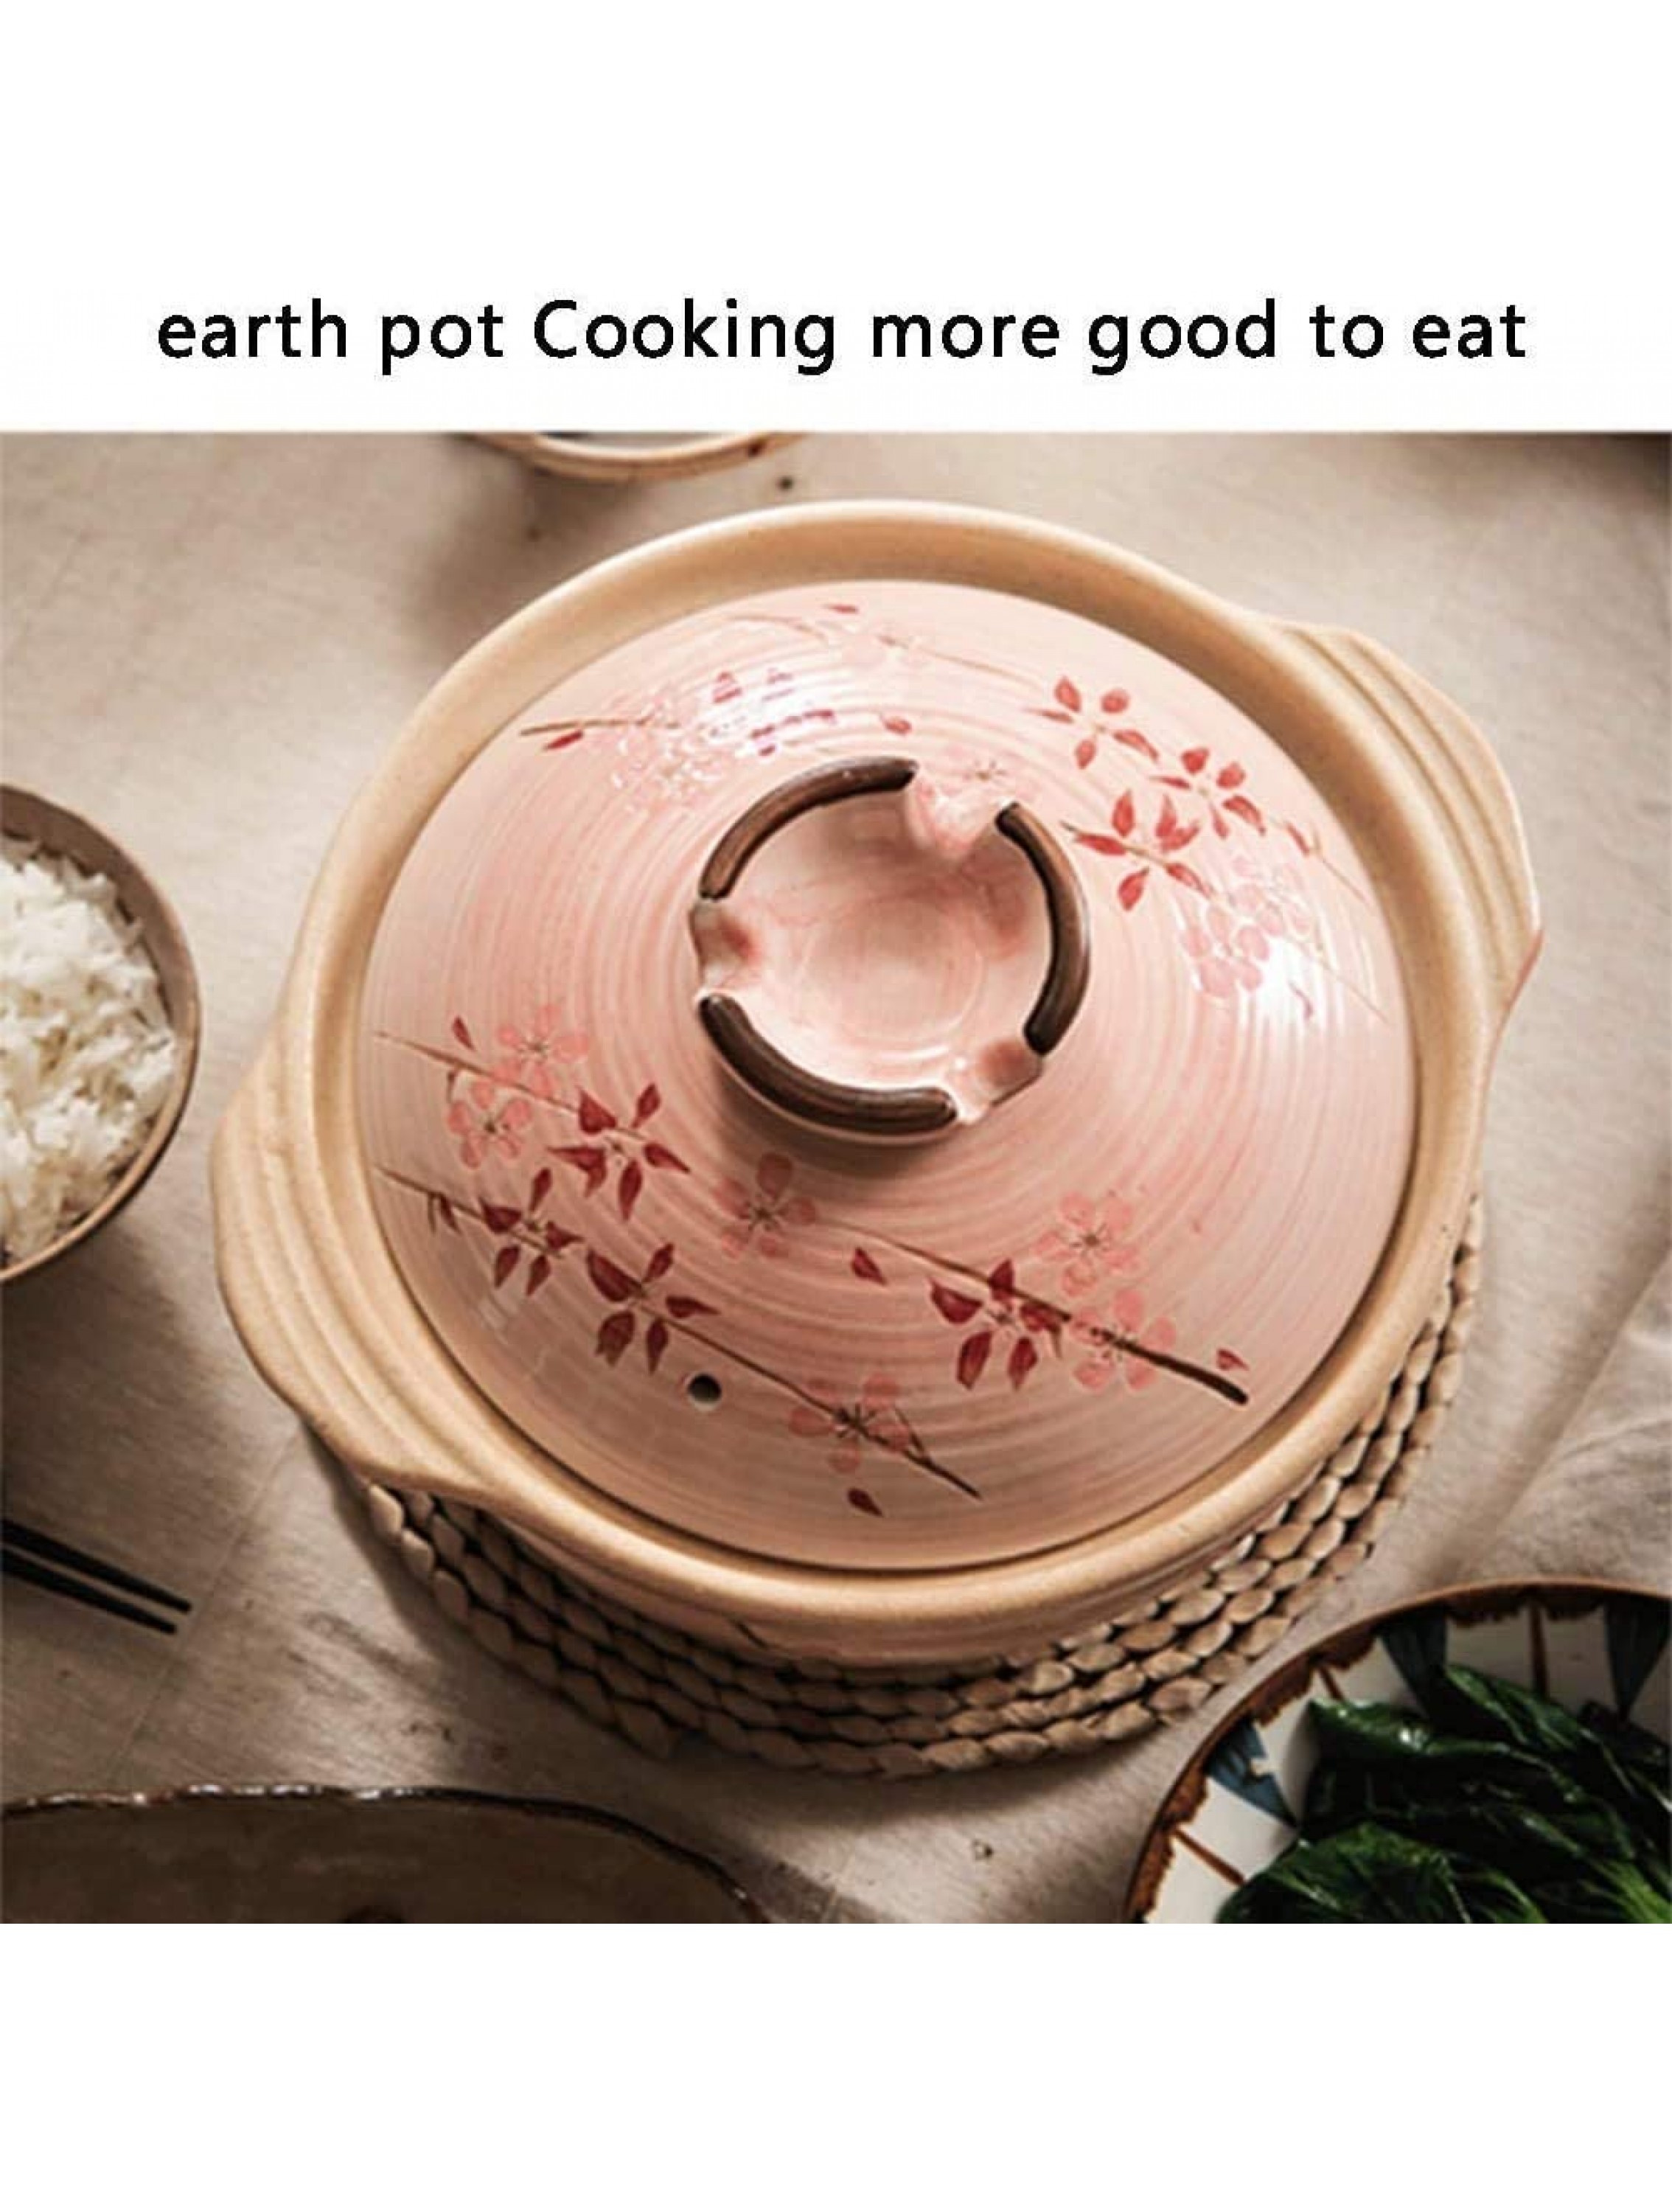 Chinese pottery -Cooker Pot 20Cm Home Cooking Tagine Pot|high temperature ceramic pot with Lids for Home Kitchen|for Most Open Flame Cookware - BPRVZB9GK